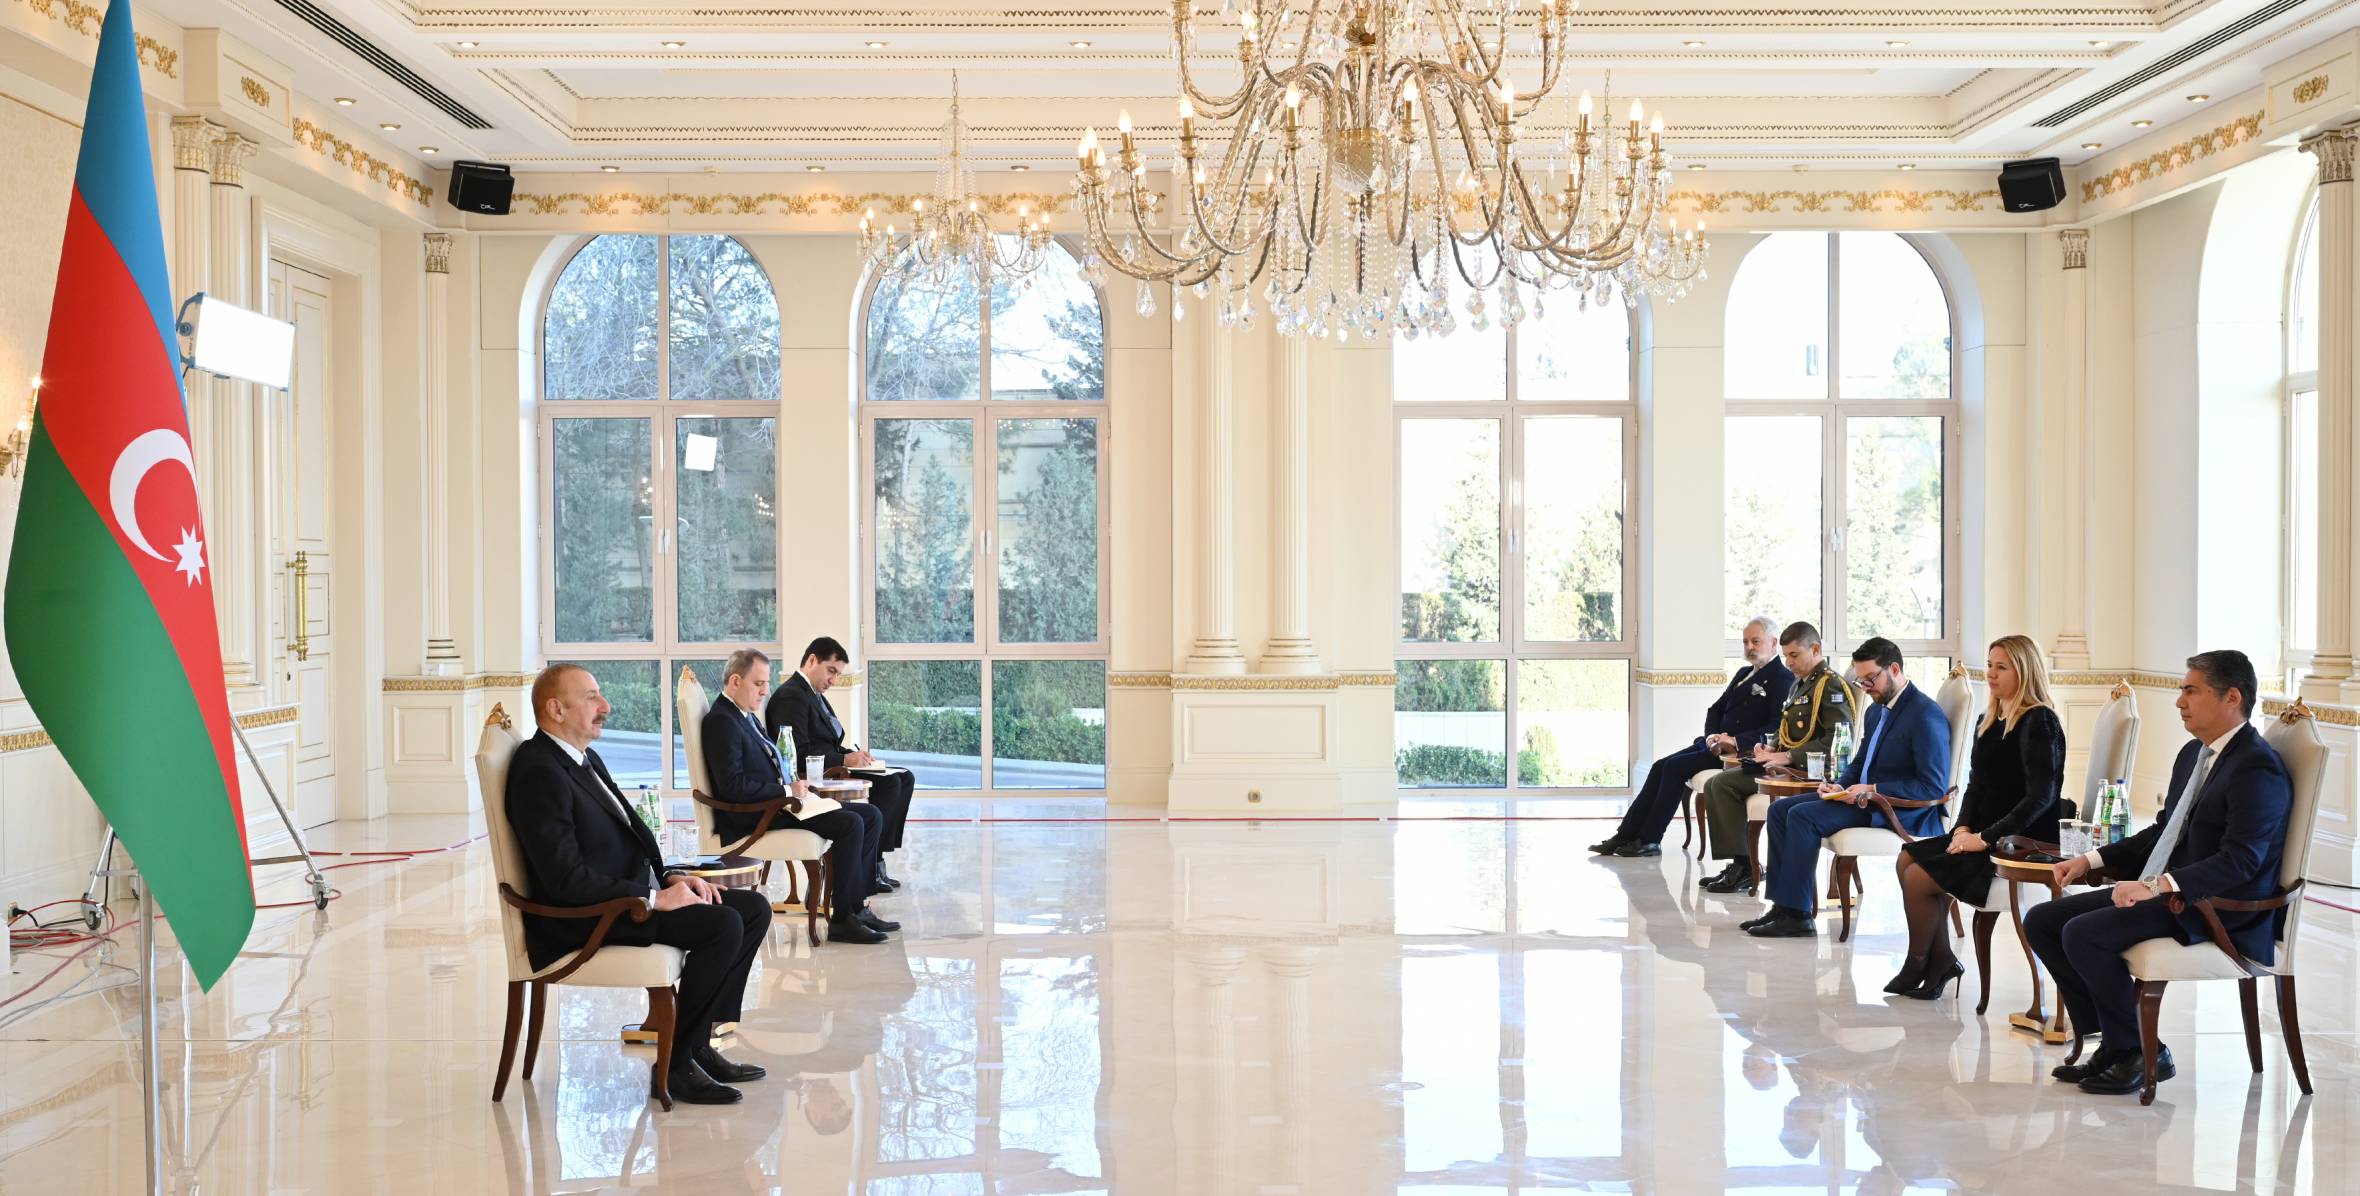 Ilham Aliyev accepted credentials of incoming ambassador of Greece